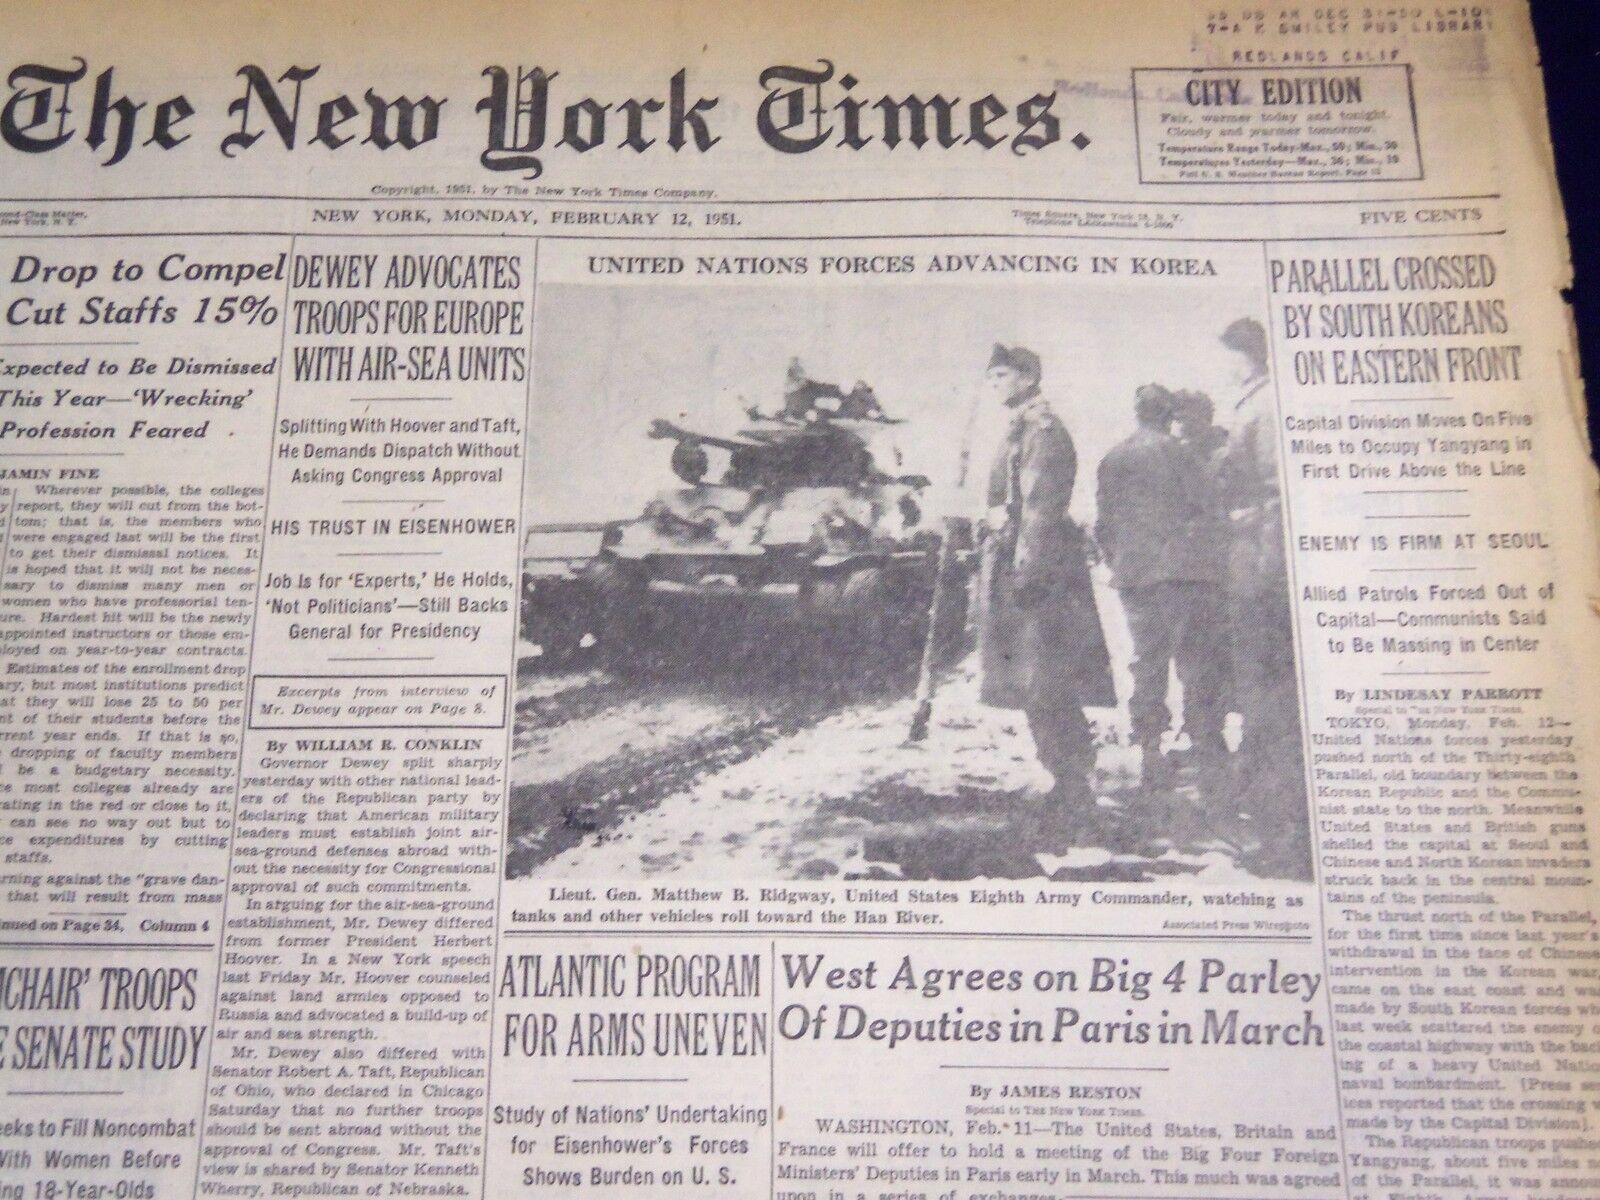 1951 FEB 12 NEW YORK TIMES - PARALLEL CROSSED BY SOUTH KOREANS - NT 1995